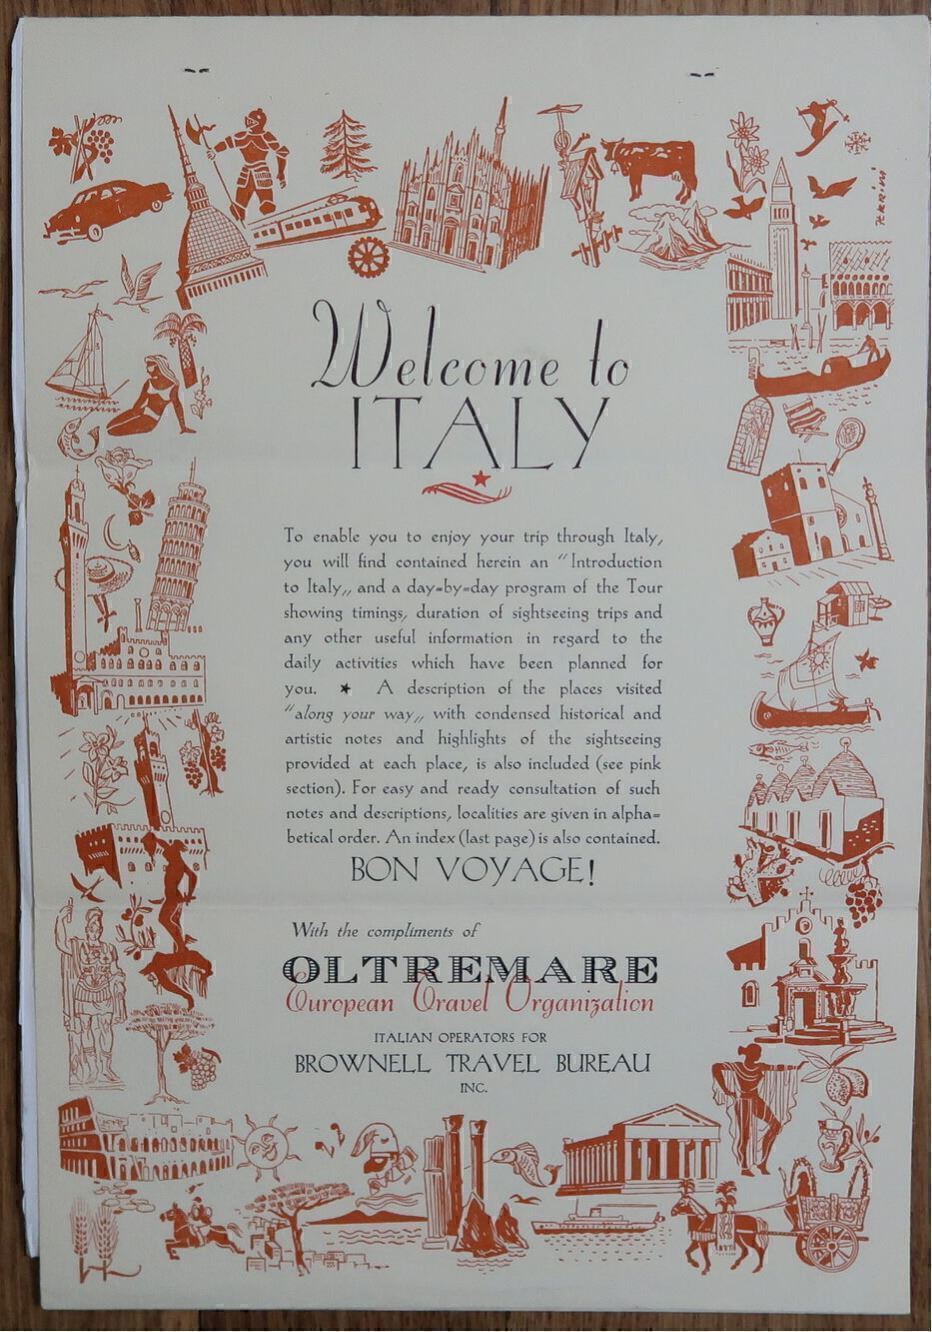 c1955 OLTREMARE EUROPEAN TRAVEL WELCOME TO ITALY DAY BY DAY ITINERARY BROWNWELL